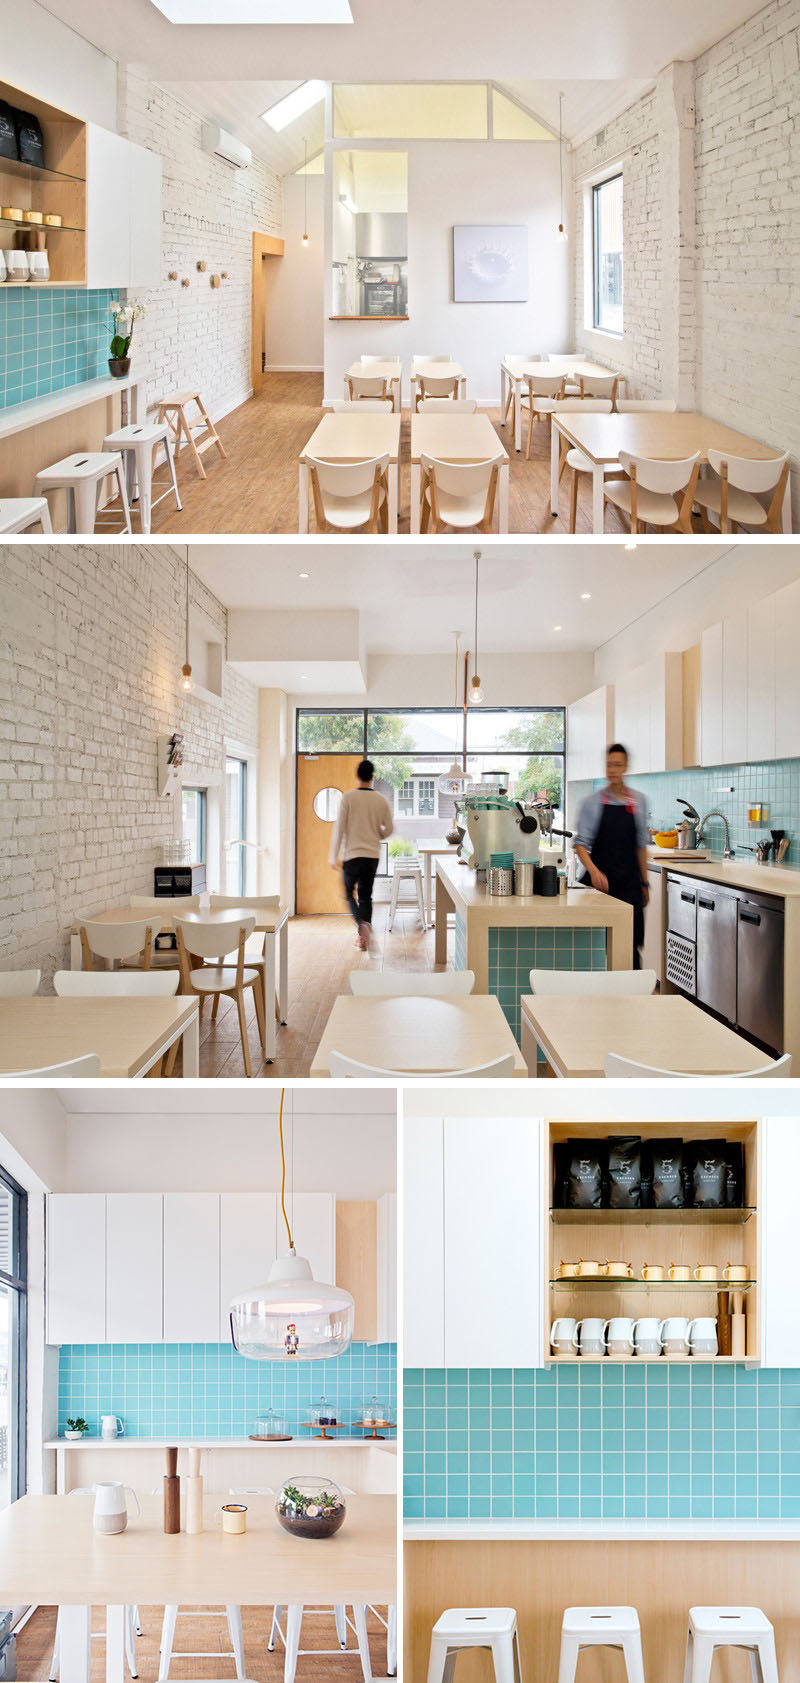 This small modern coffee shop features white painted bricks, light wood furniture, and turquoise tile behind the service bar.